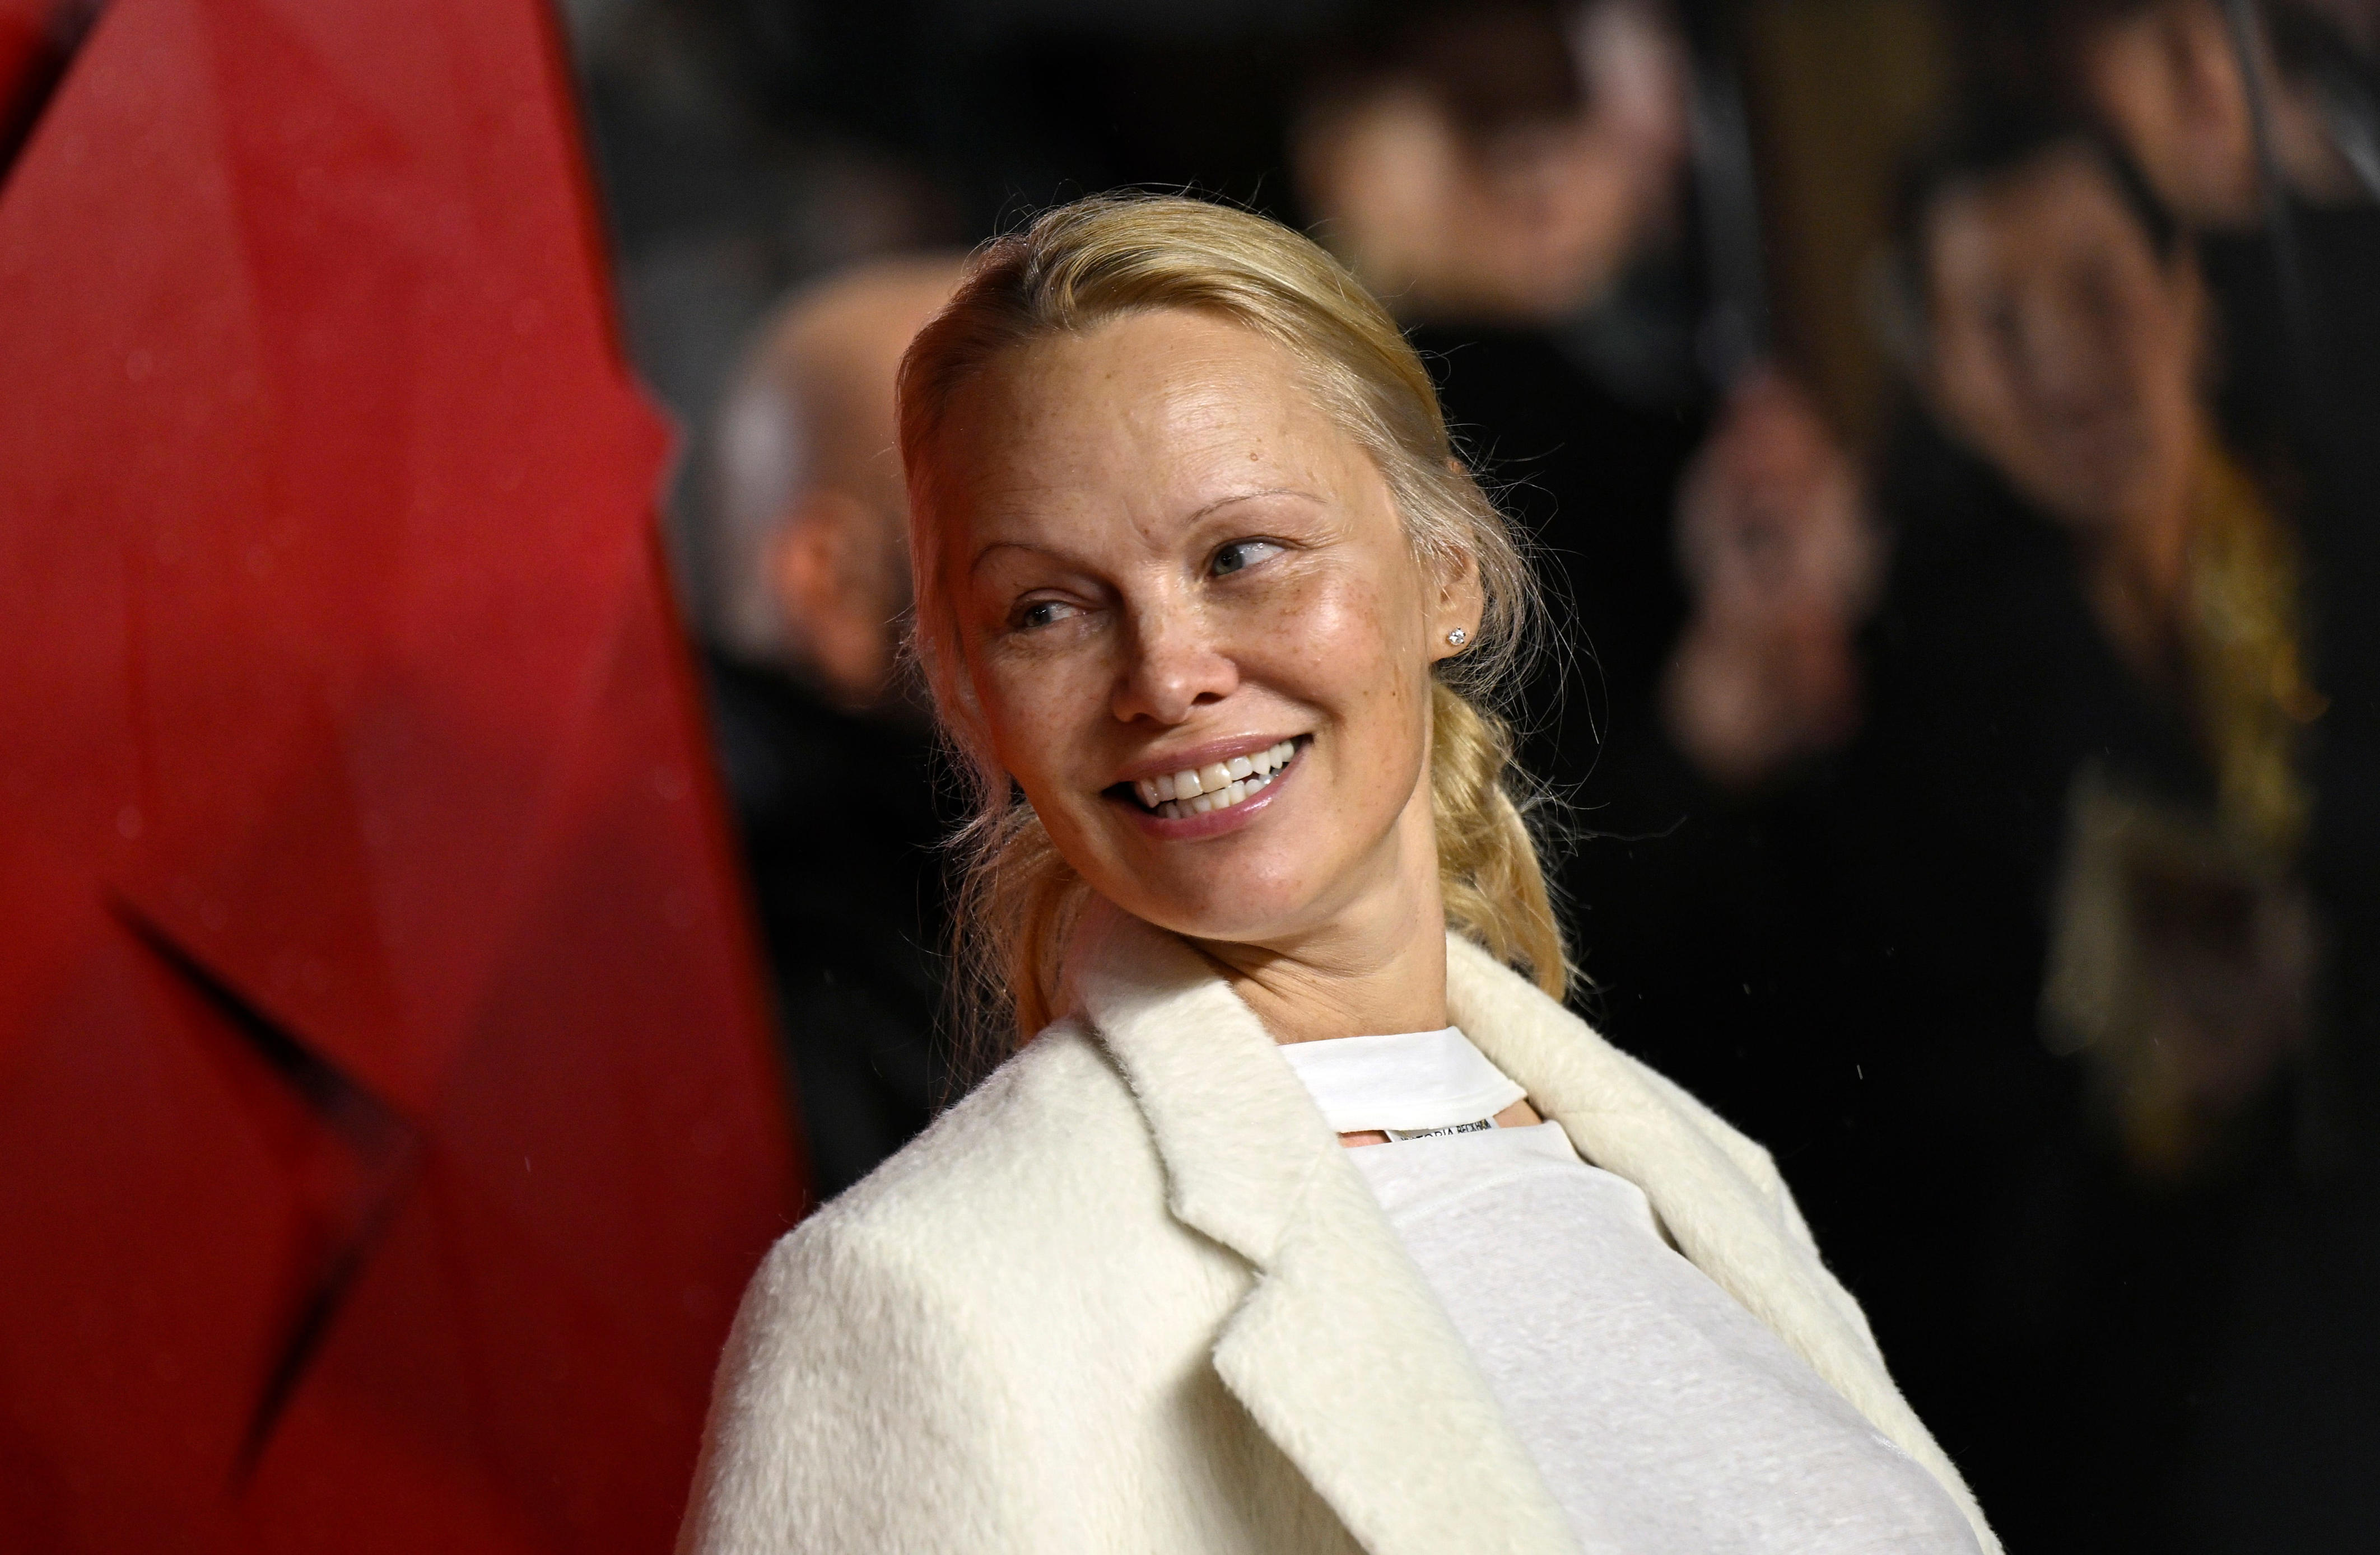 pamela anderson reveals why she ditched makeup. there's a lot we can learn from her.